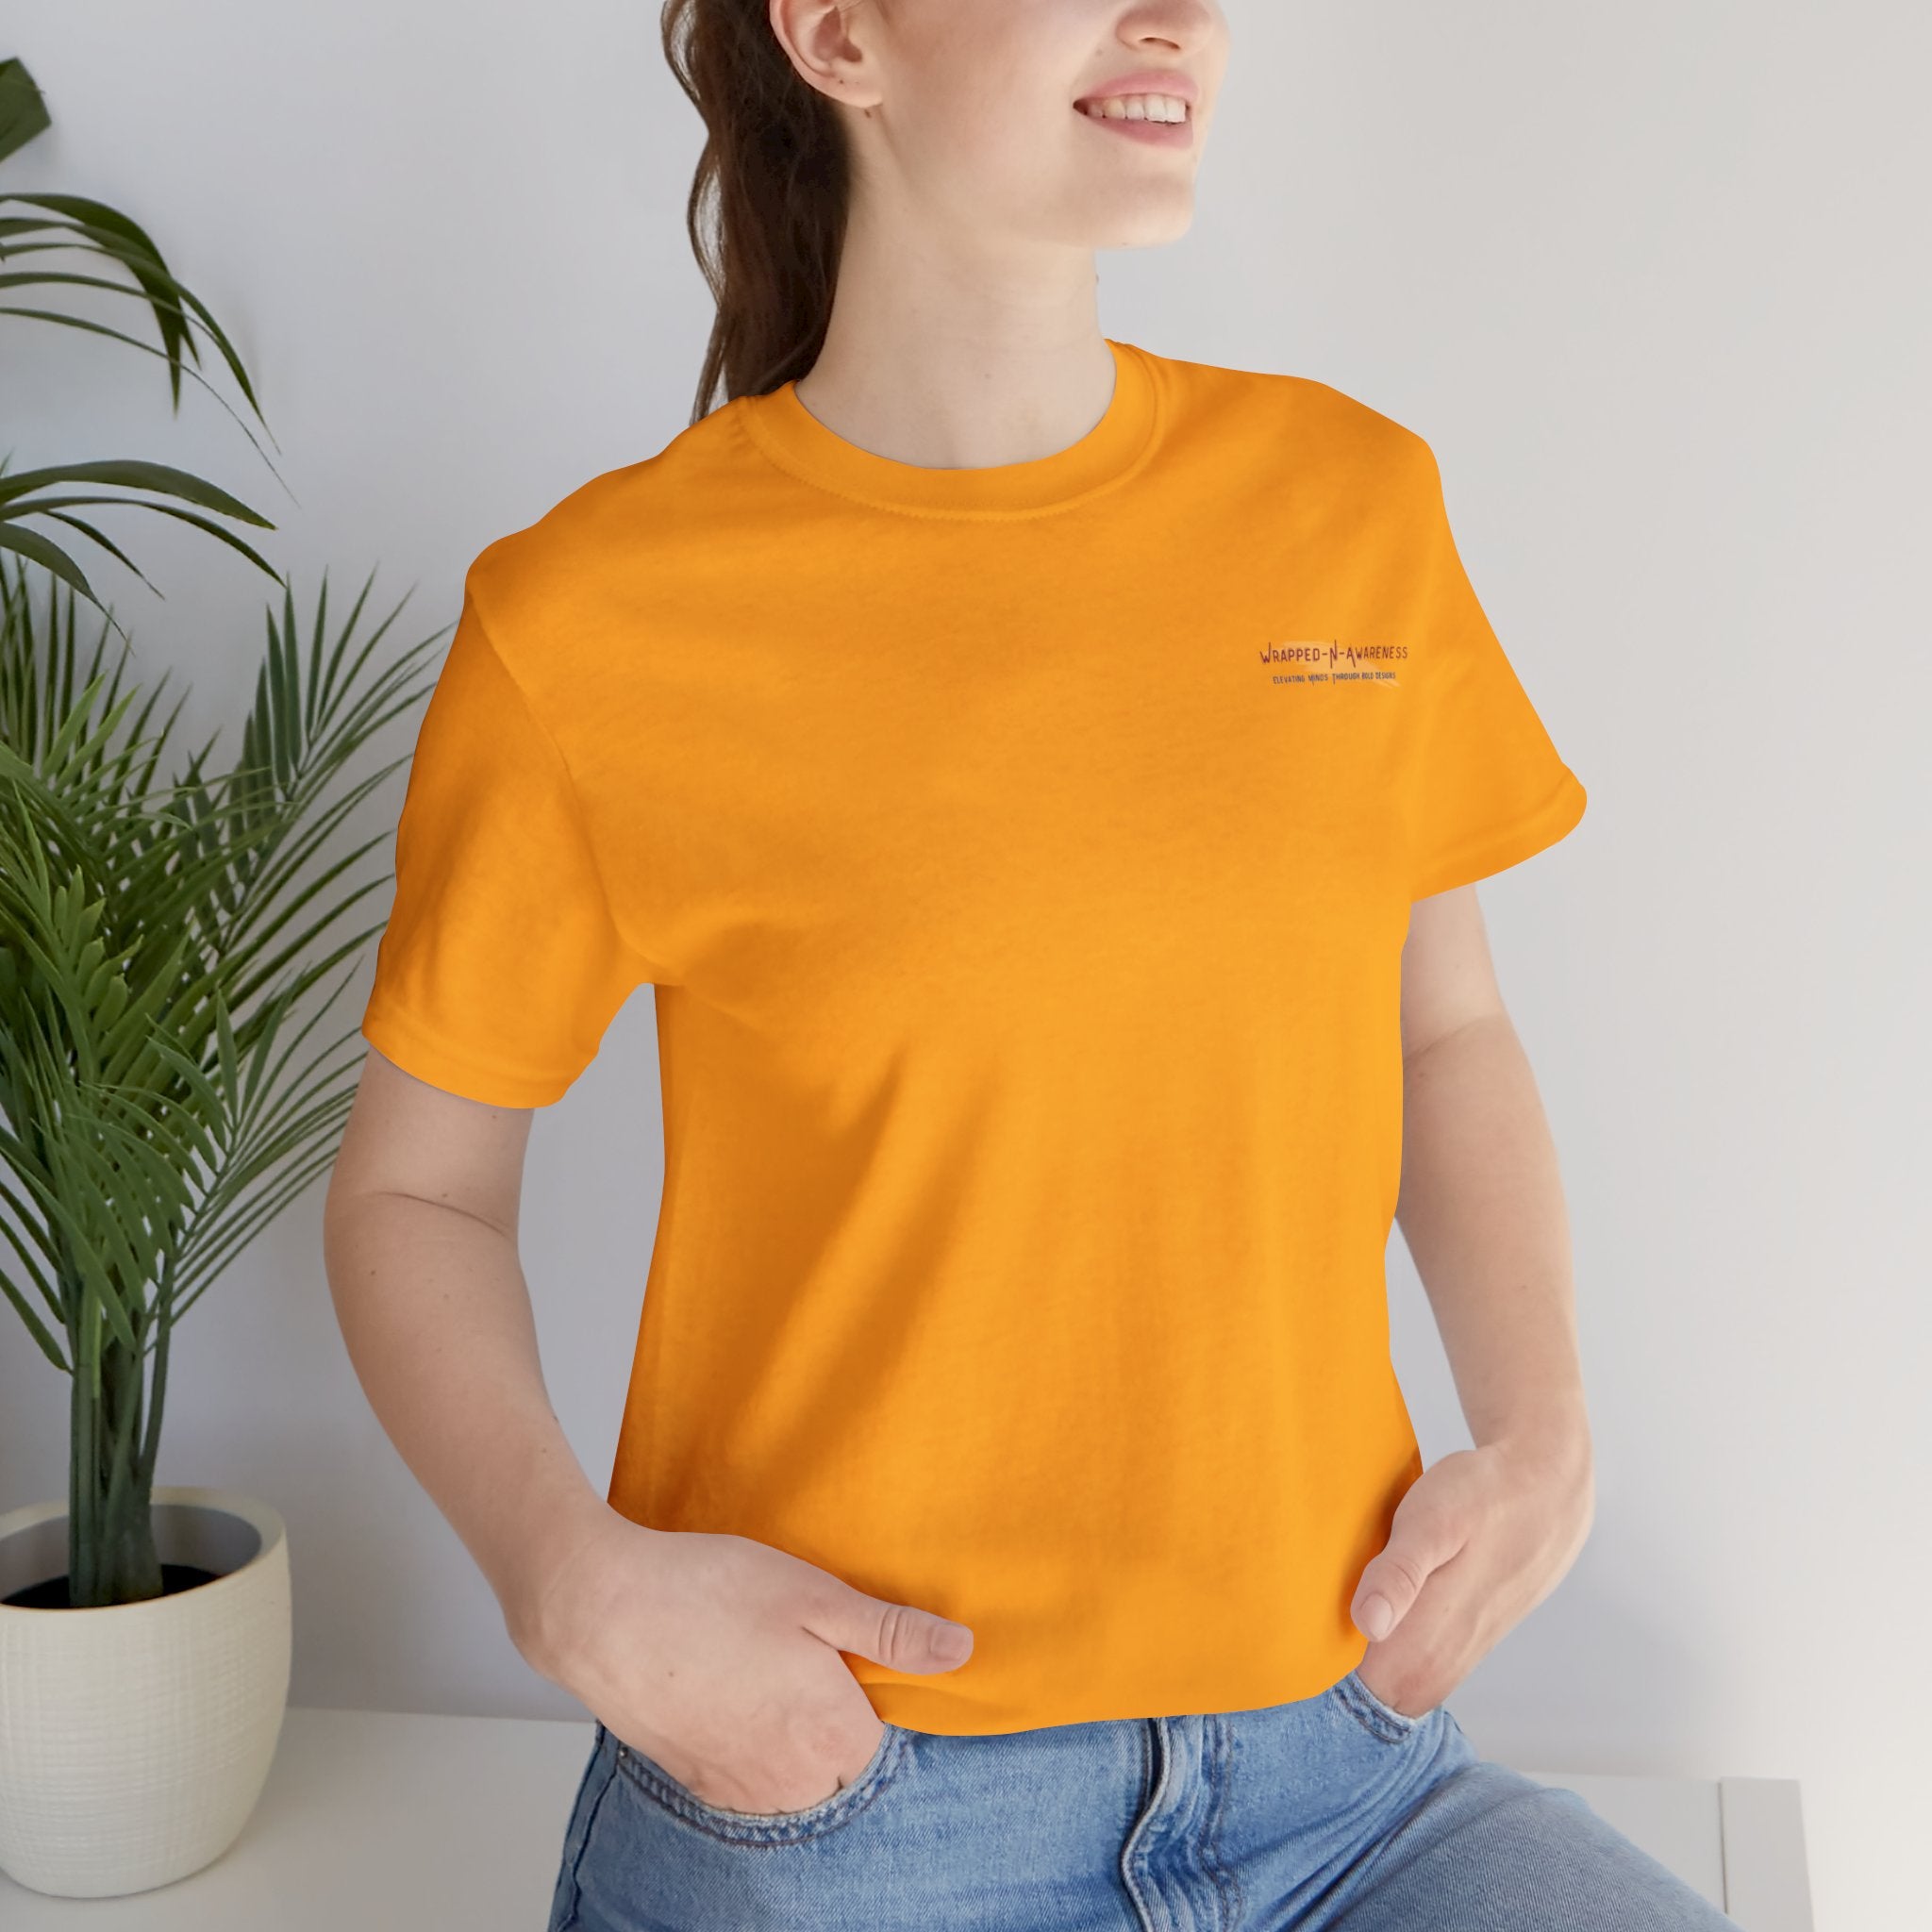 Progress Over Perfection Tee - Bella+Canvas 3001 Yellow Airlume Cotton Bella+Canvas 3001 Crew Neckline Jersey Short Sleeve Lightweight Fabric Mental Health Support Retail Fit Tear-away Label Tee Unisex Tee T-Shirt 8096911926370978511_2048 Printify